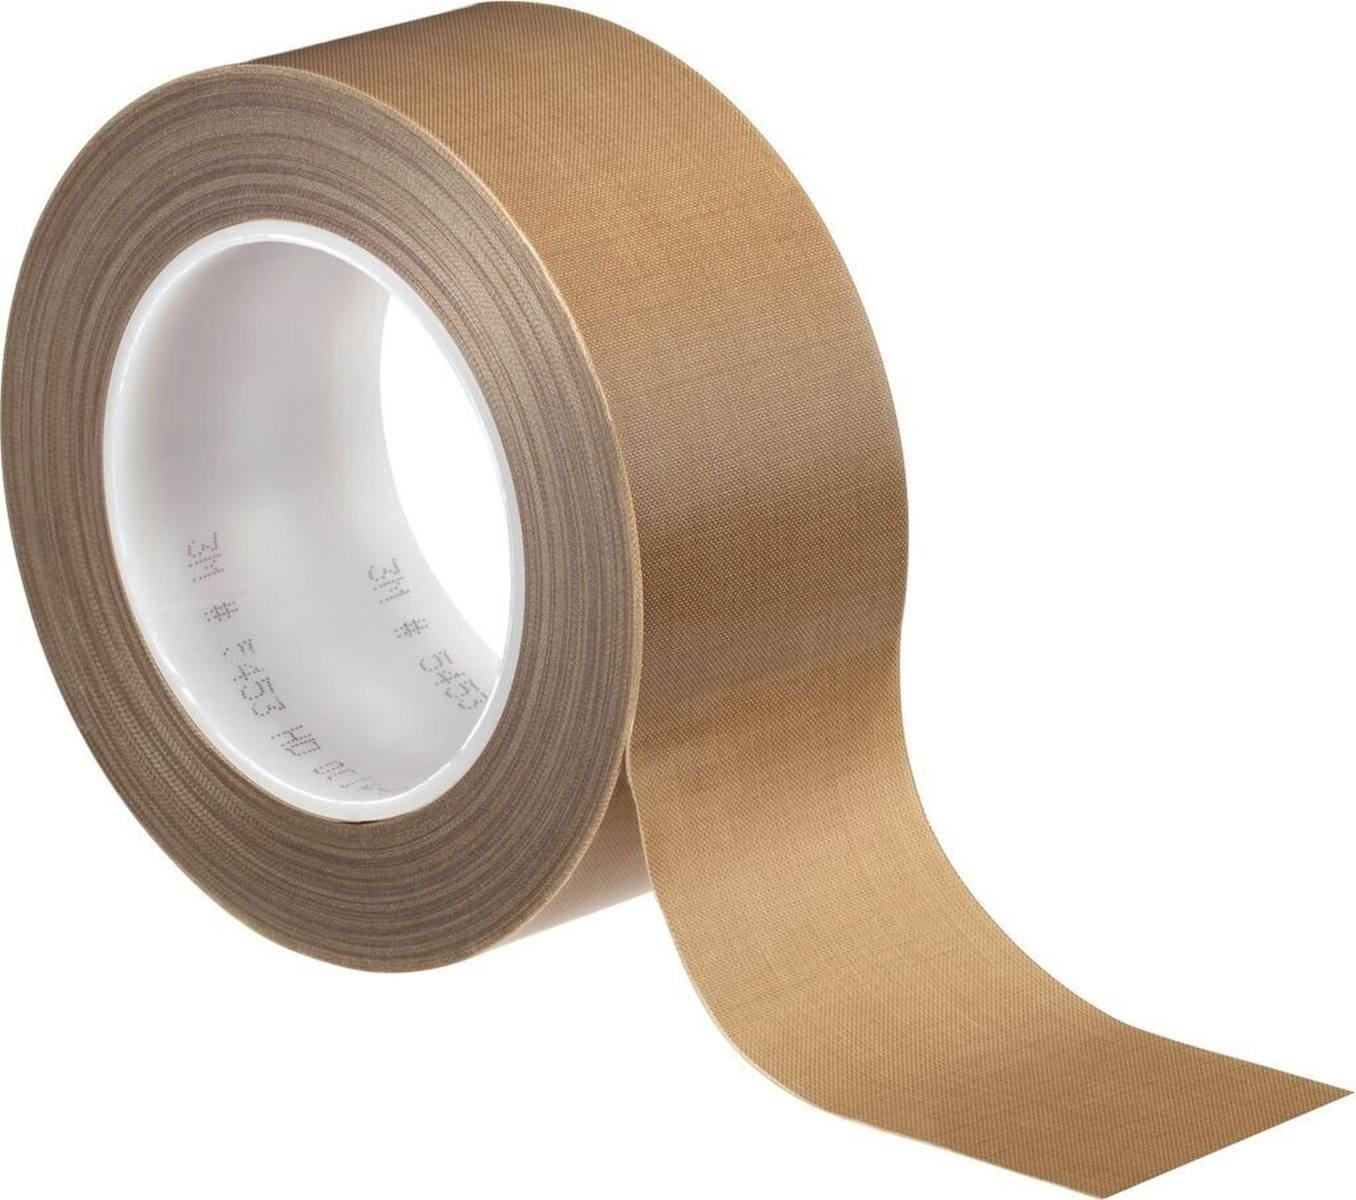 3M 5453 PTFE glass adhesive tape 12mmx33m, 0.22mm, silicone